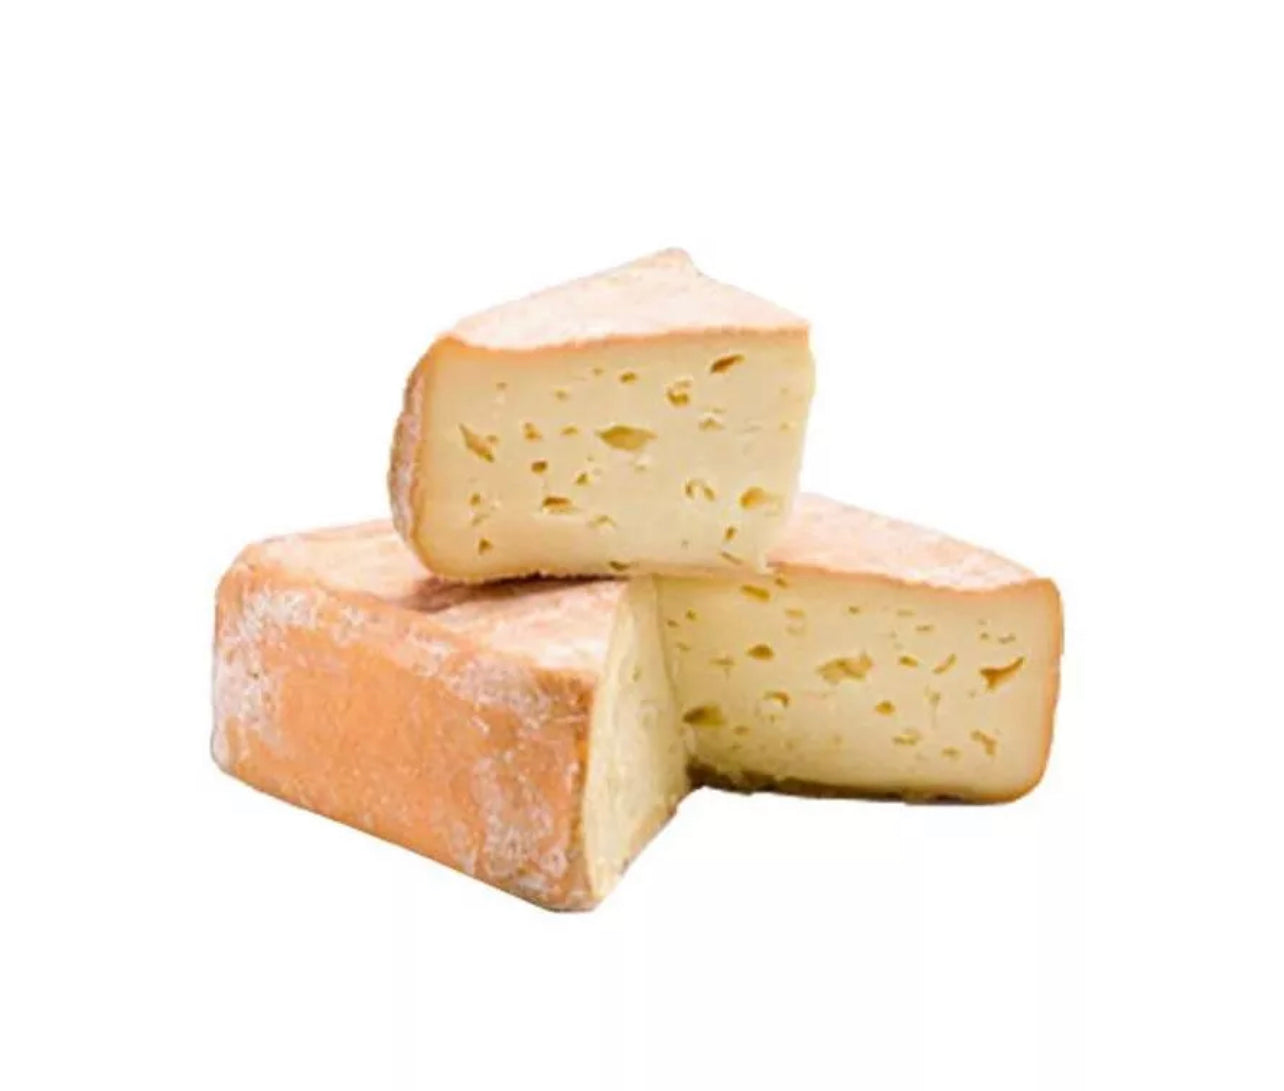 Farmhouse Maroilles AOP with raw milk - 750g